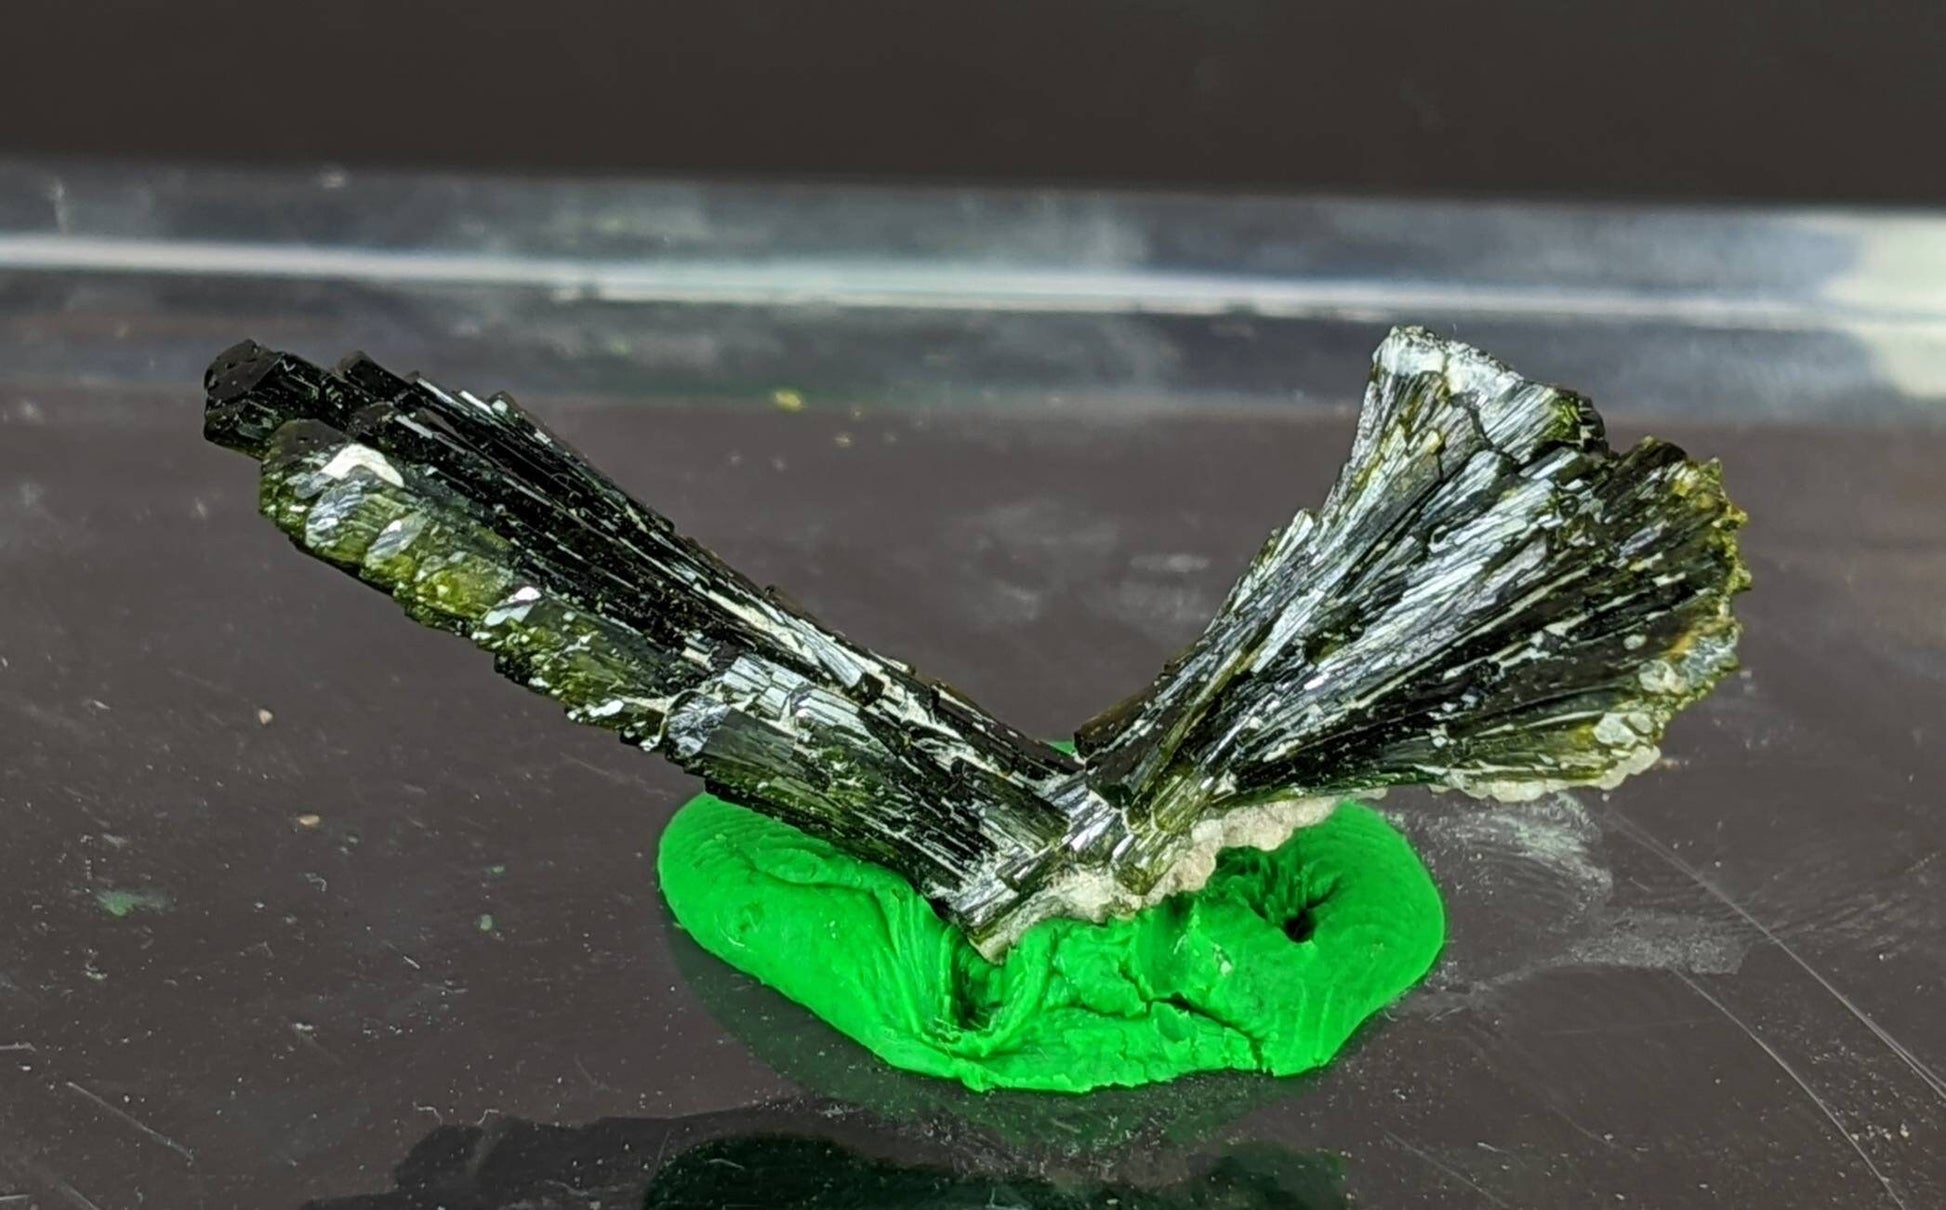 ARSAA GEMS AND MINERALSNatural aesthetic bowtie Epidote terminated crystal from Pakistan, weight: 3 grams - Premium  from ARSAA GEMS AND MINERALS - Just $15.00! Shop now at ARSAA GEMS AND MINERALS